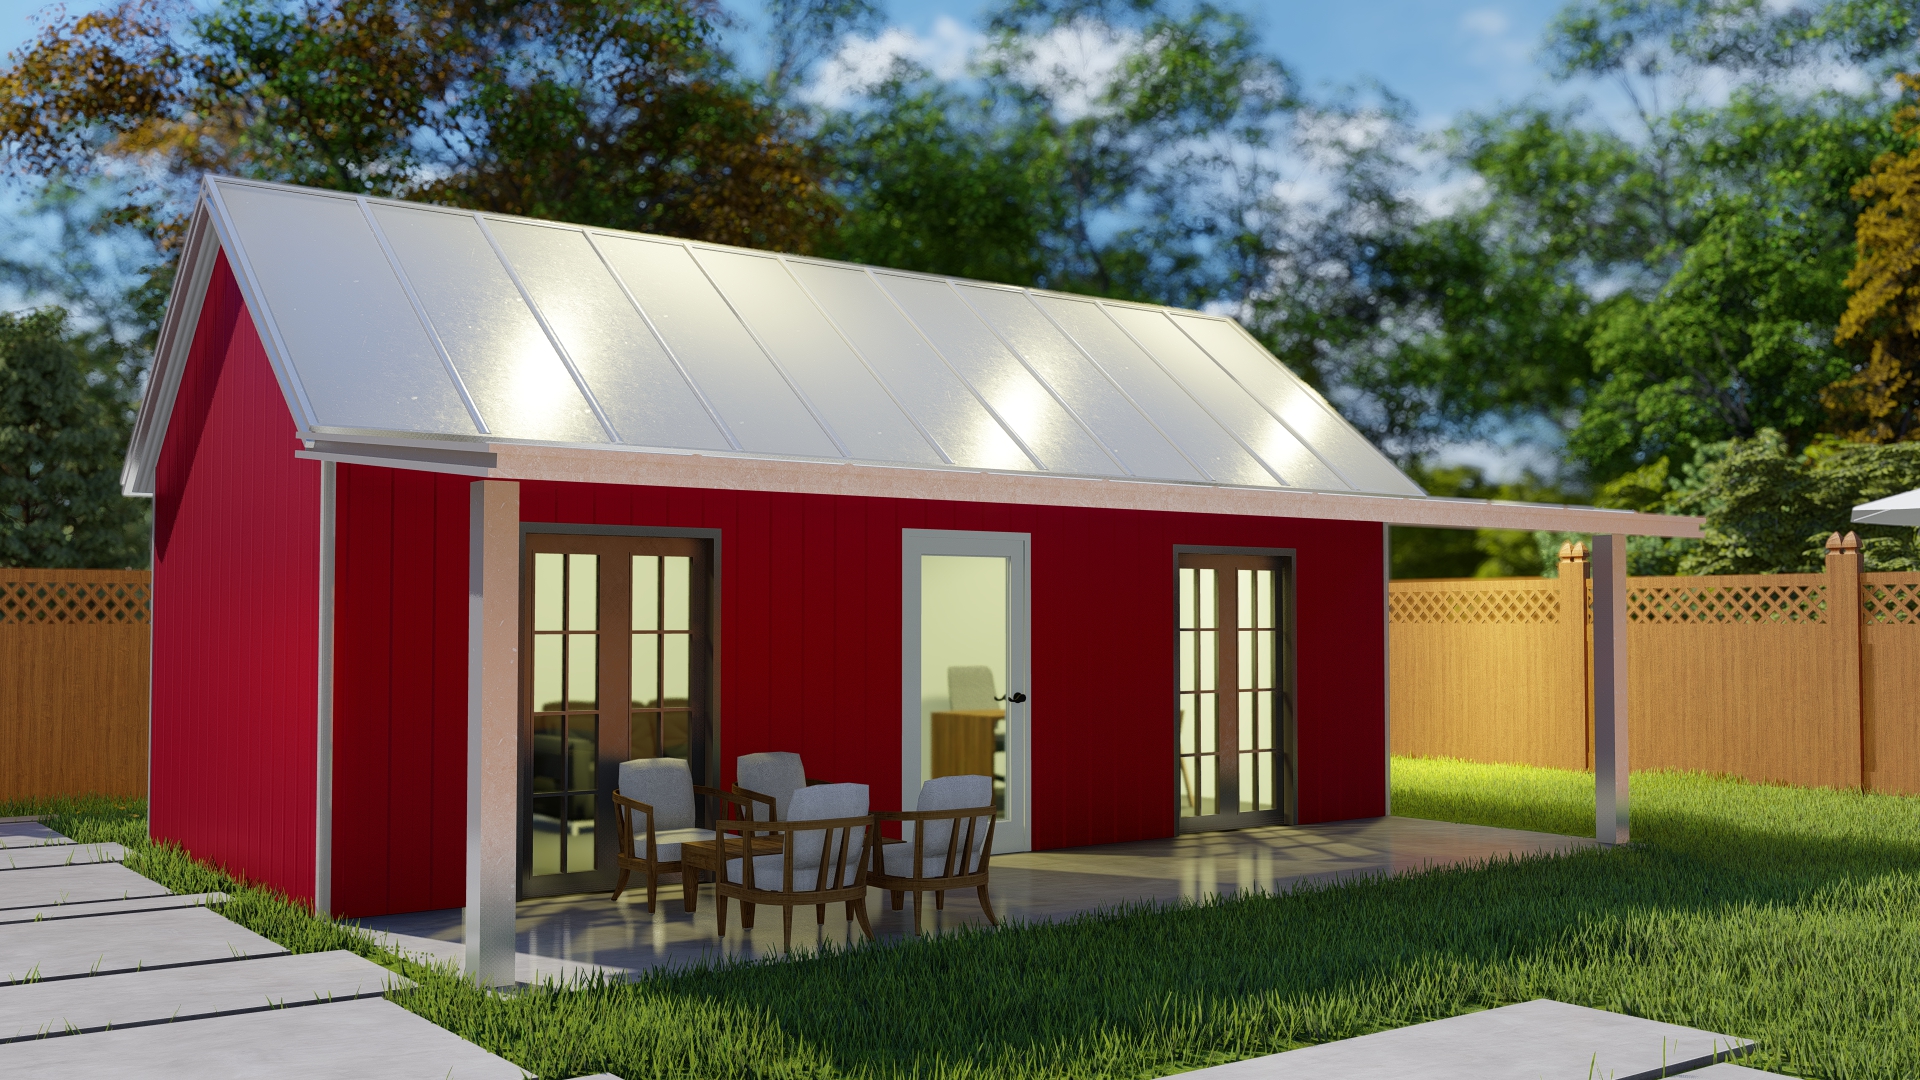 00_01-large-backyard-front-porch-pitch-red